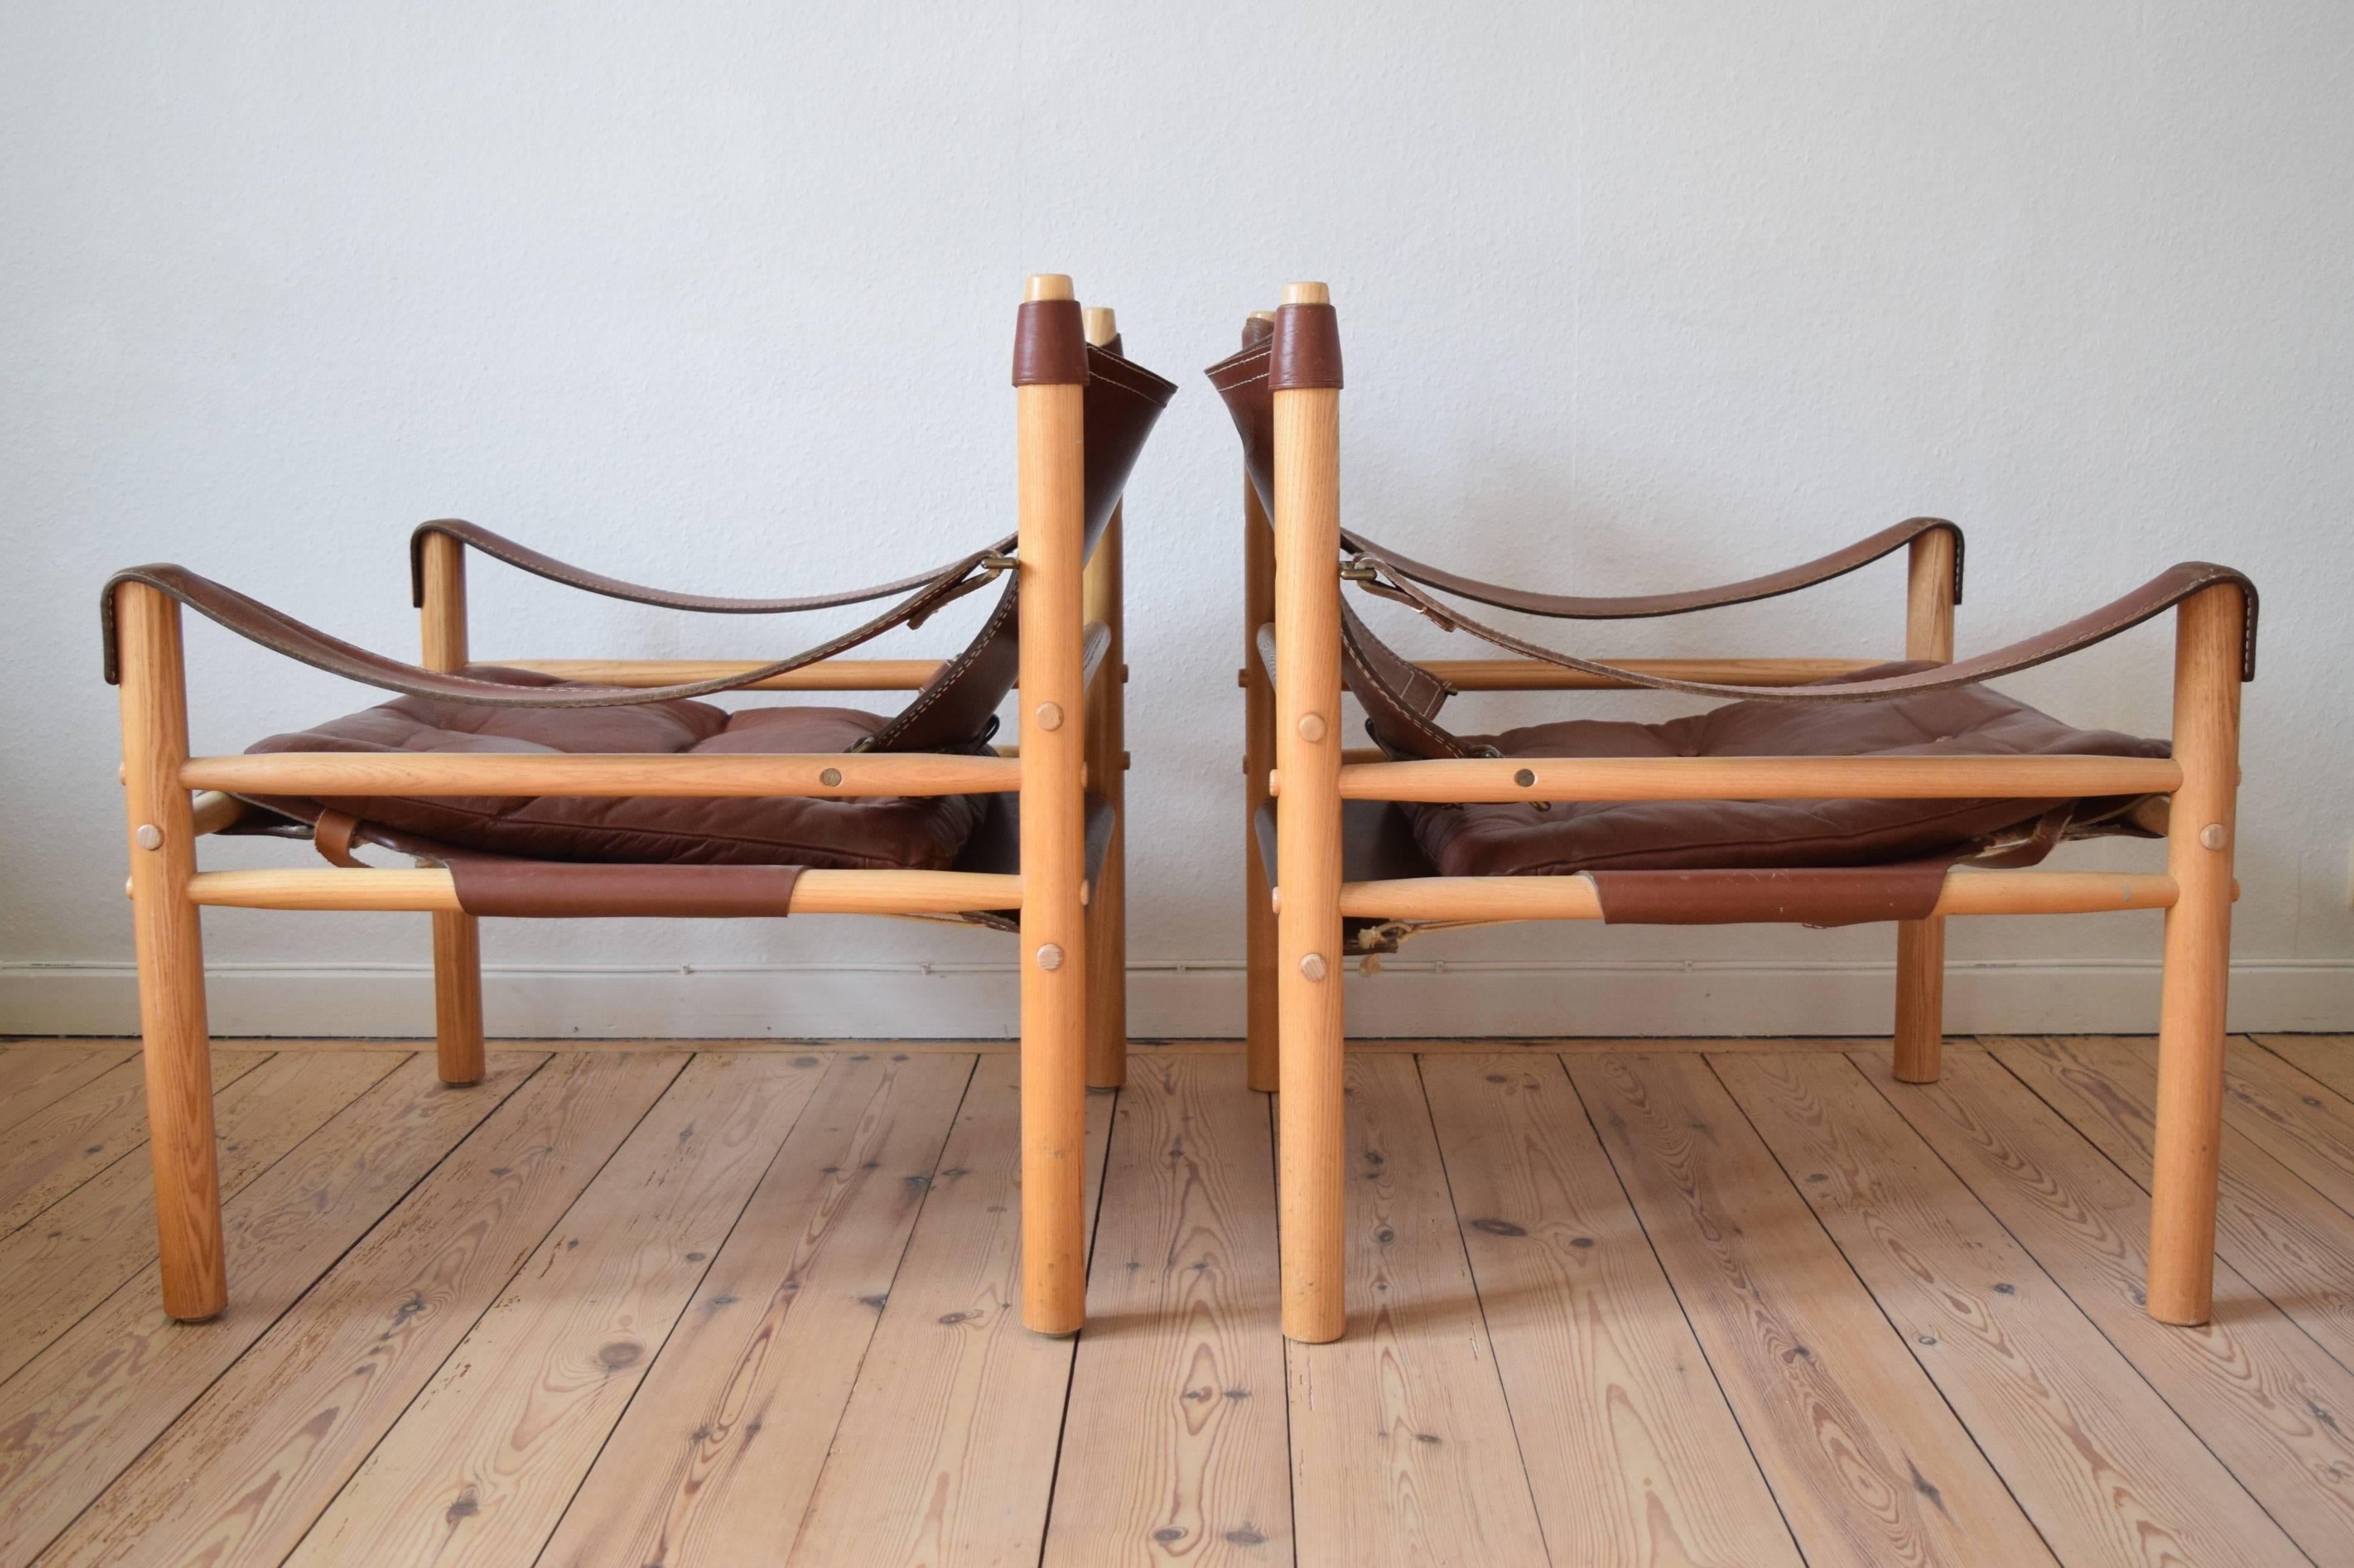 A matching pair of safari chairs designed by Arne Norell and produced during the 1970s by Norell Furniture, Sweden. These chairs feature cognac leather cushions and seats and seats with brass buckles on an ash frame. The seats can be adjusted from